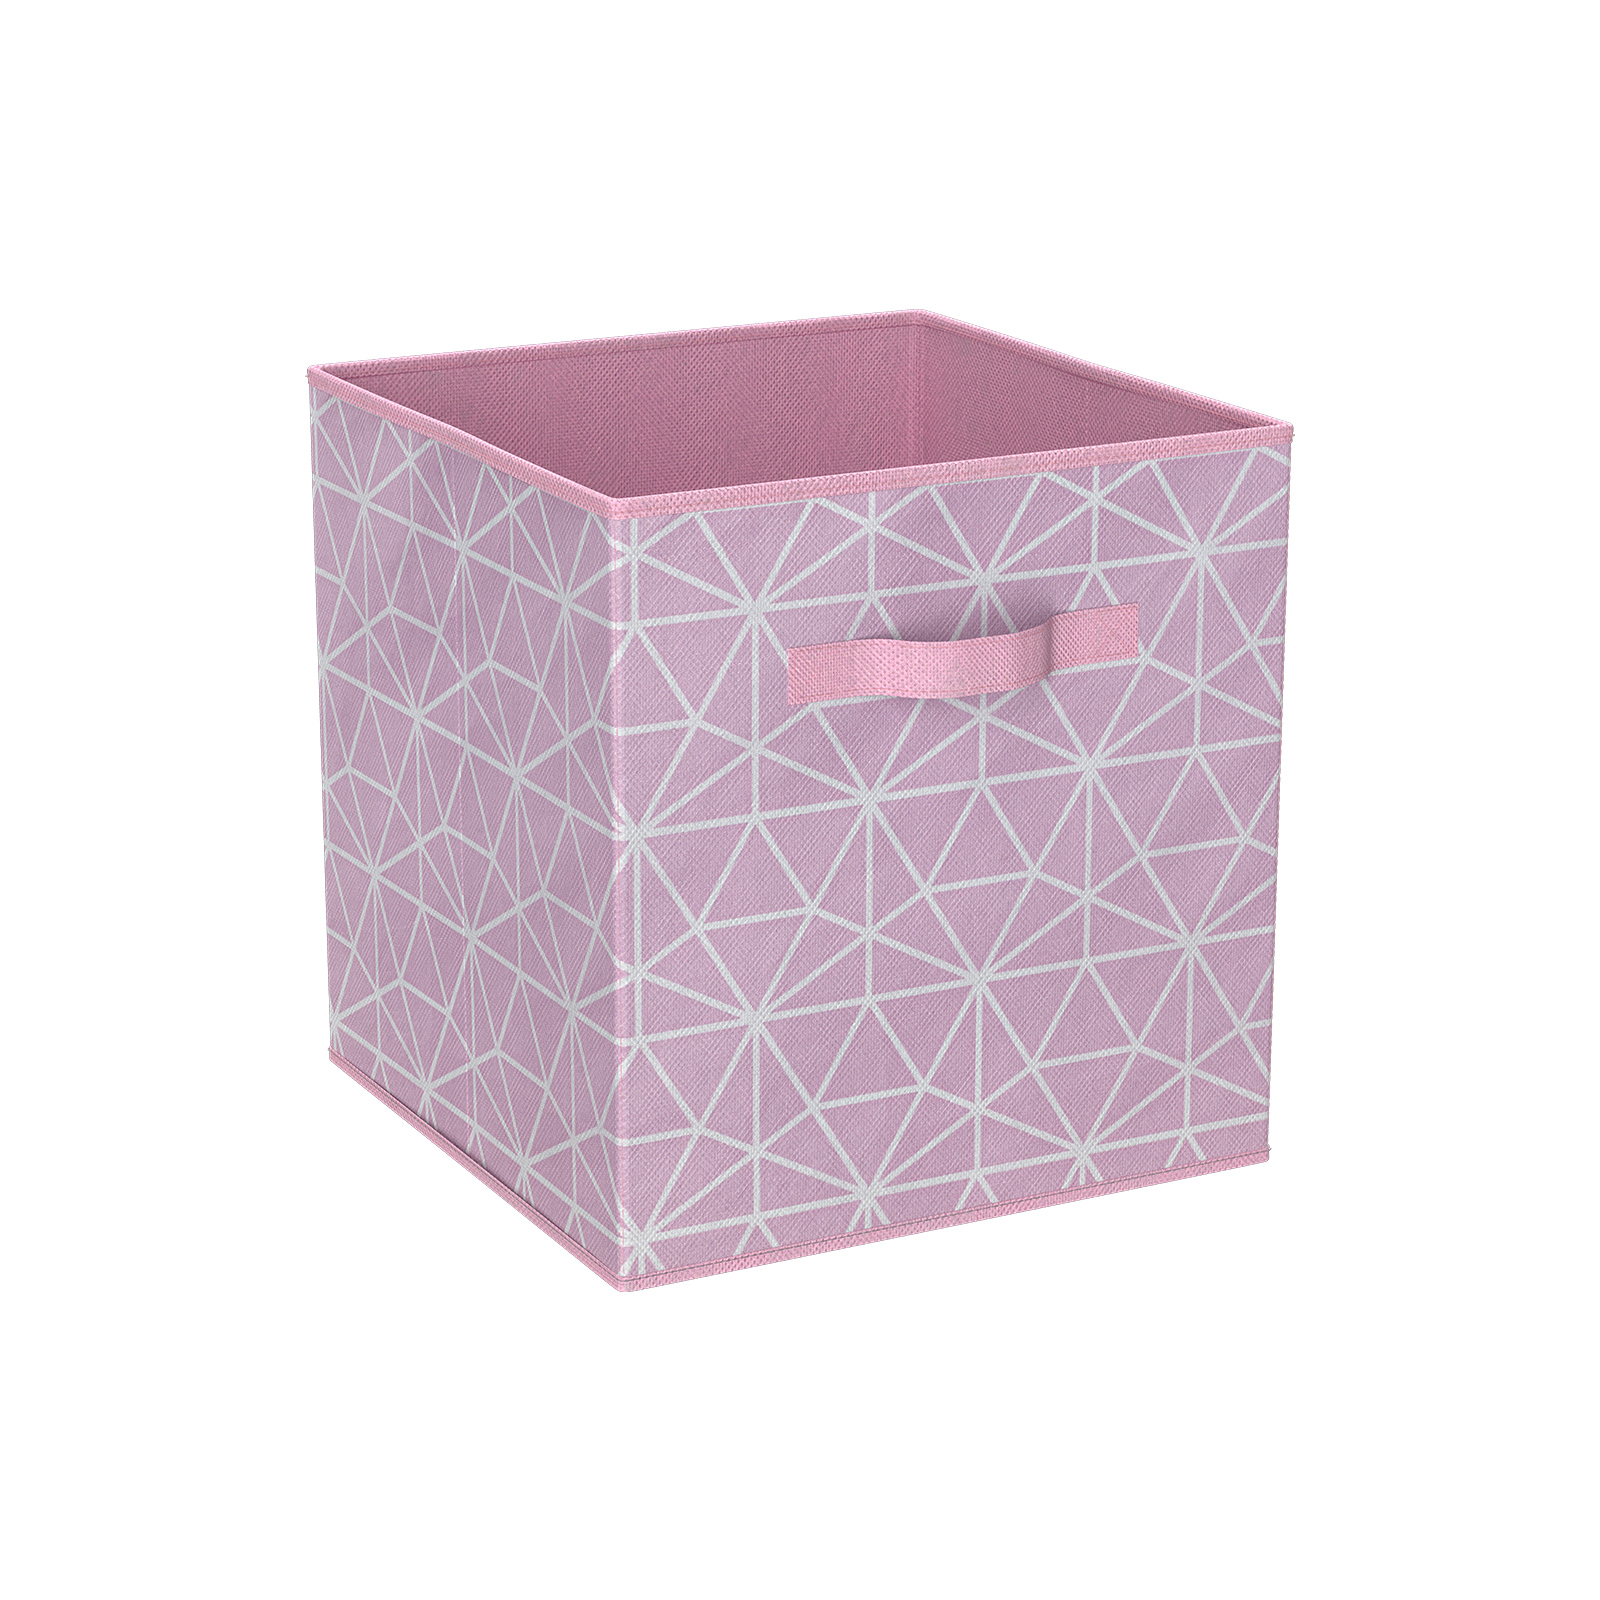 Clever Cube Compact Fabric Insert Geometric